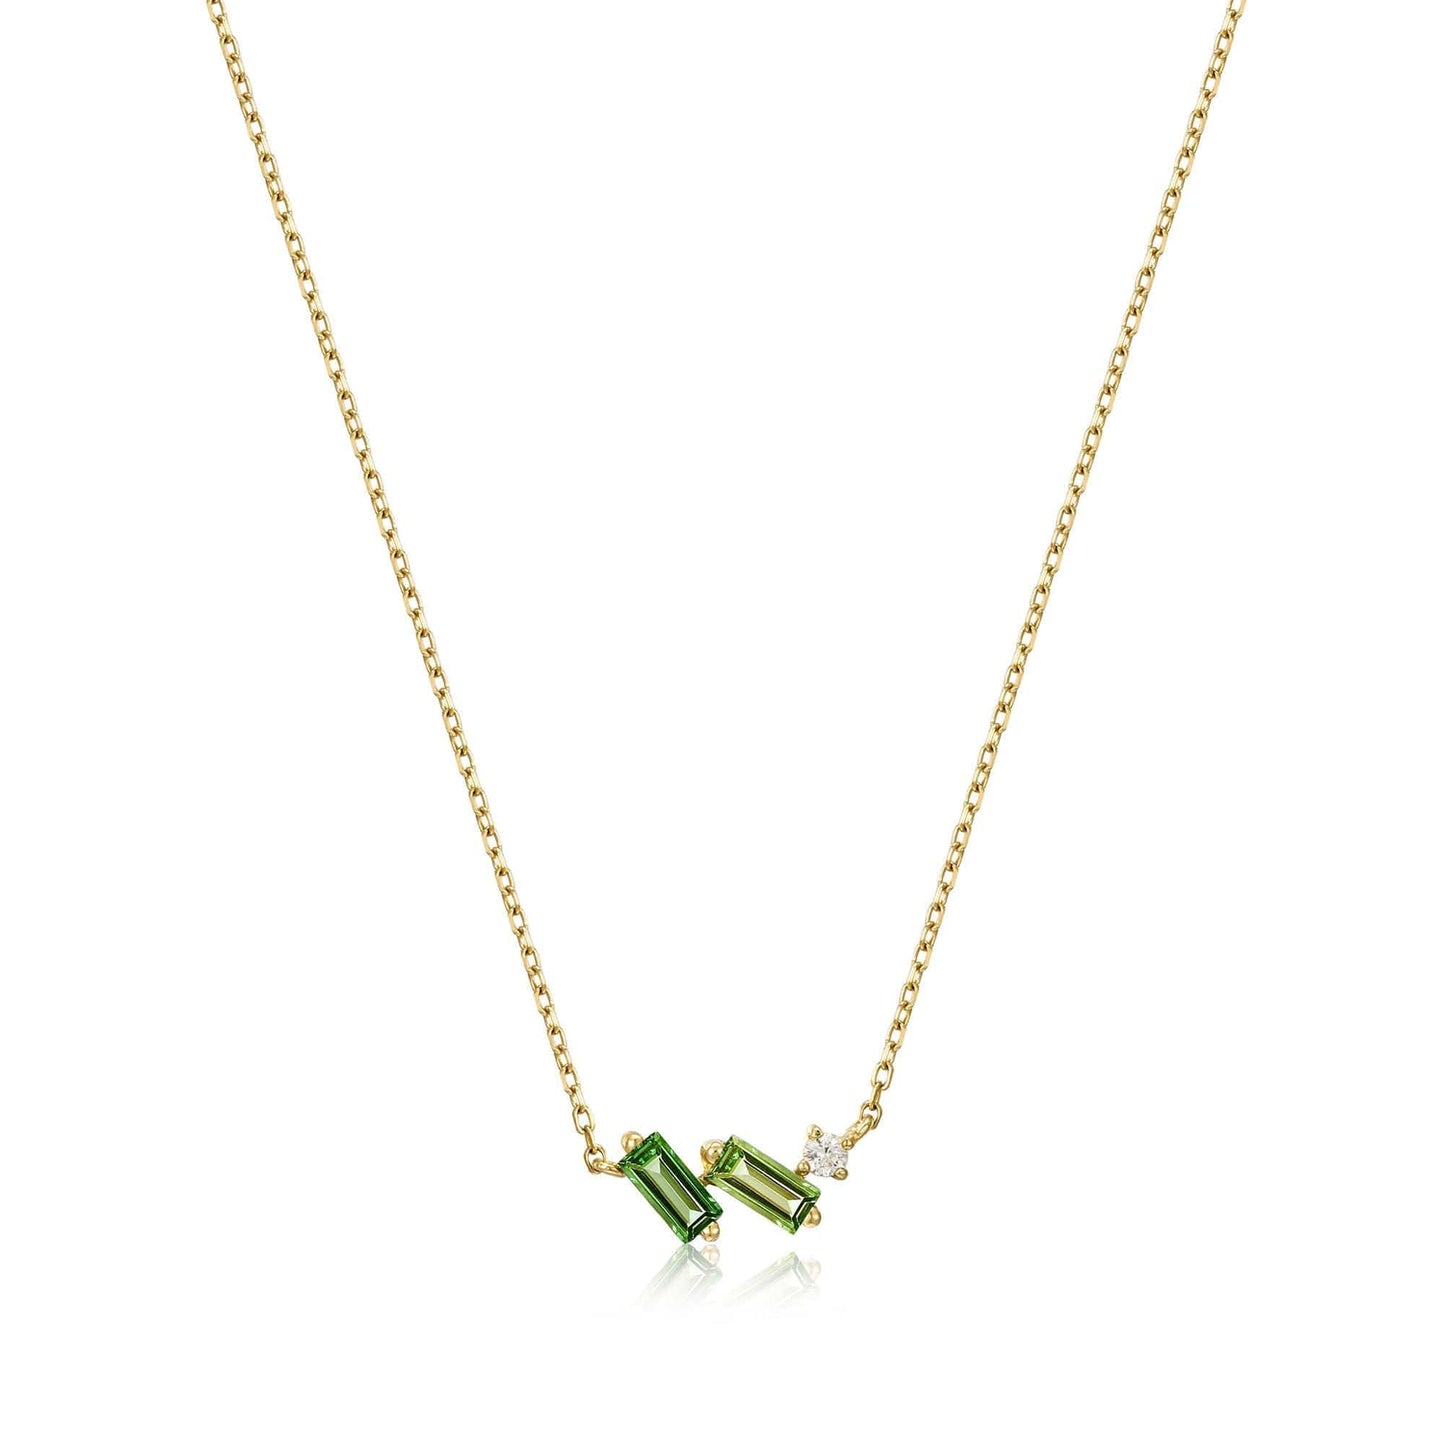 NKL-14K 14kt Gold Tourmaline and White Sapphire Necklace